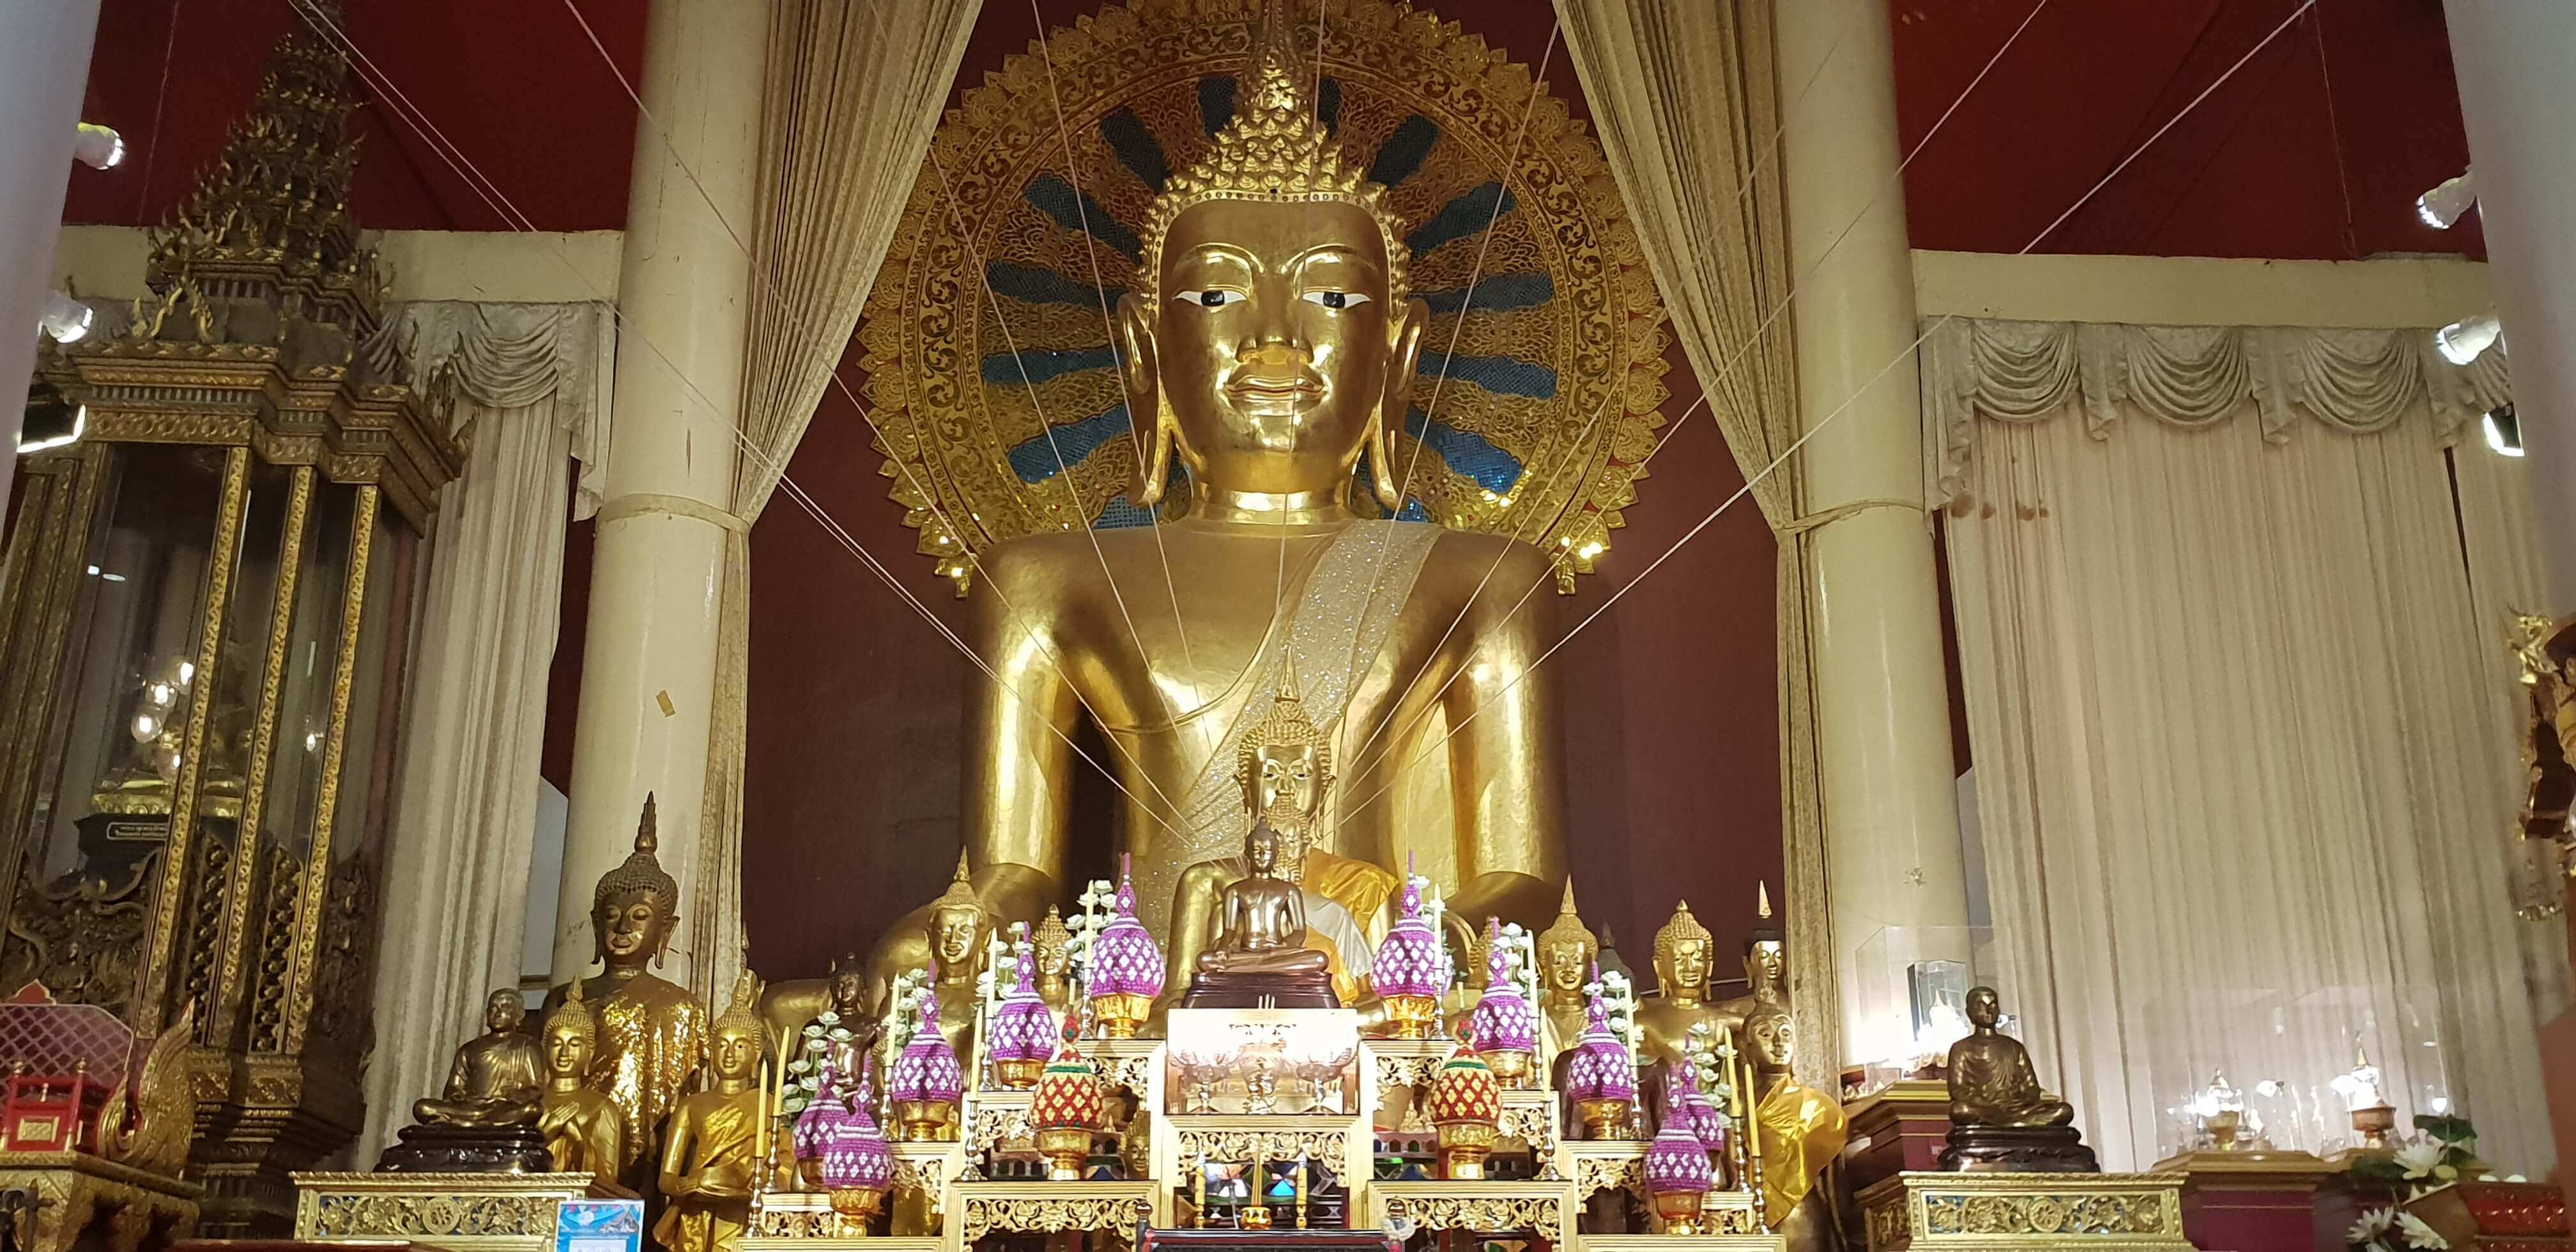 Wat Phra Singh is considered to be the second holiest temple after Wat Phra That Doi Suthep